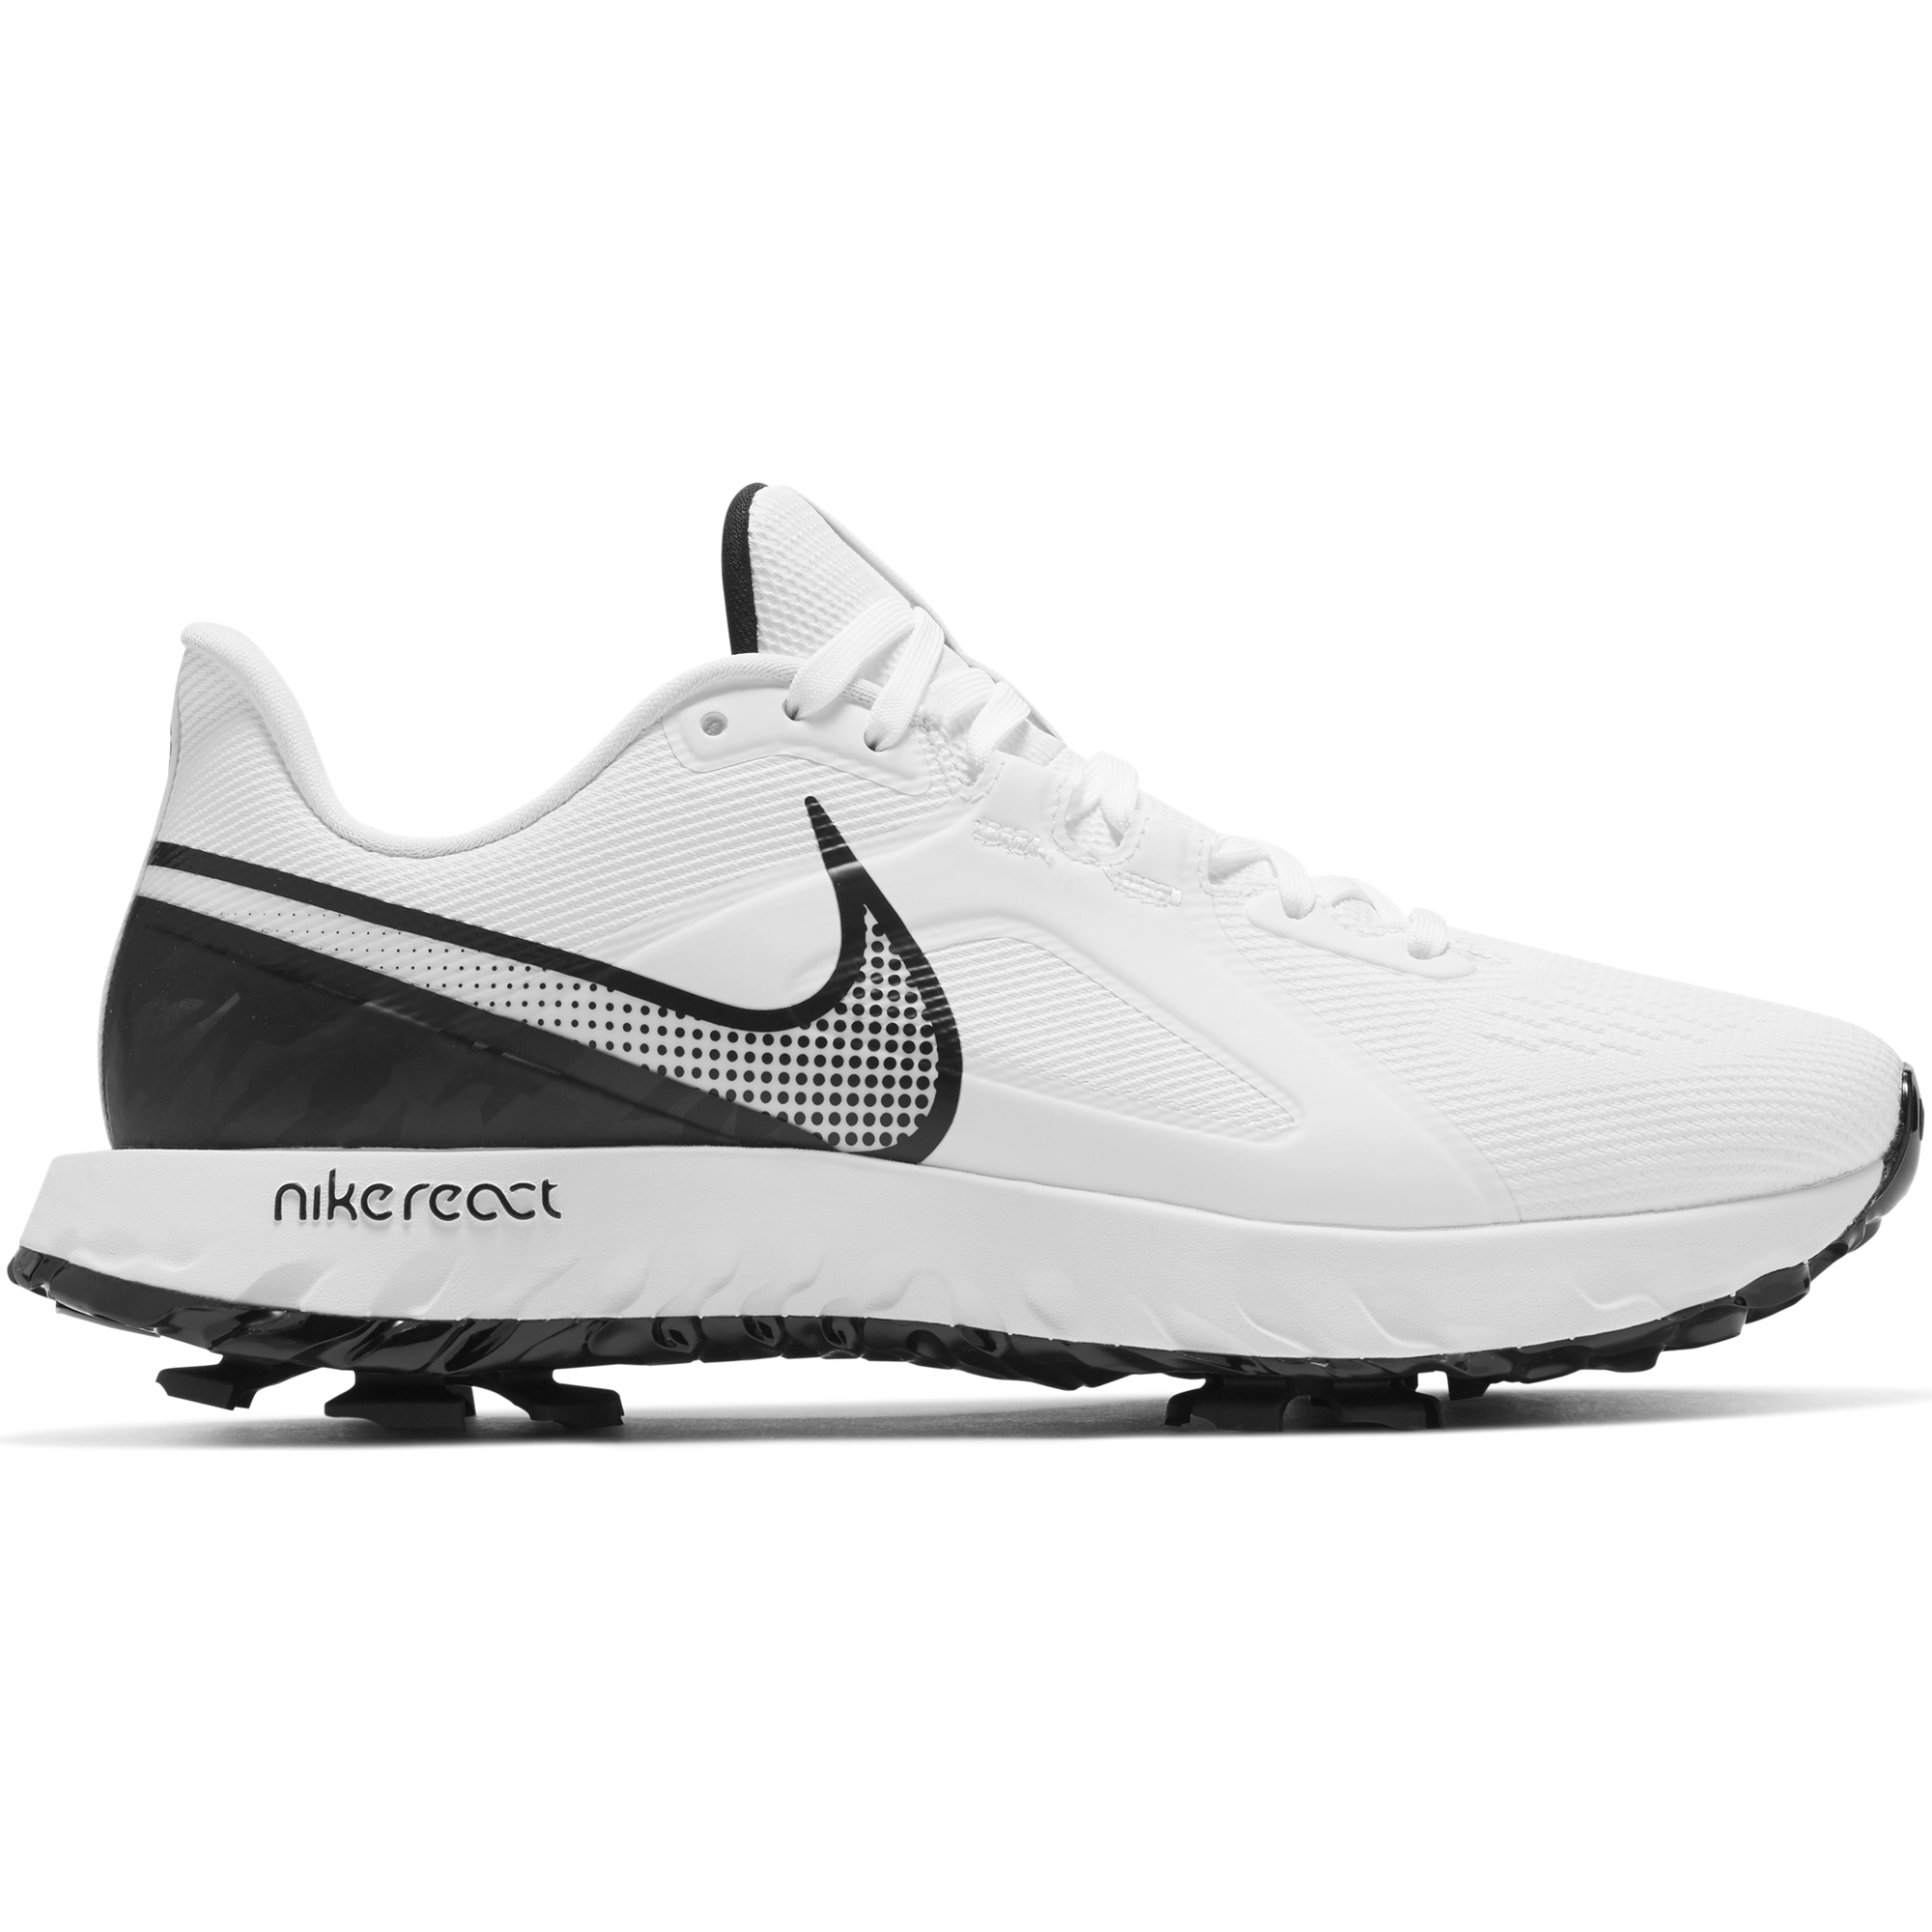 nike react golf shoes review